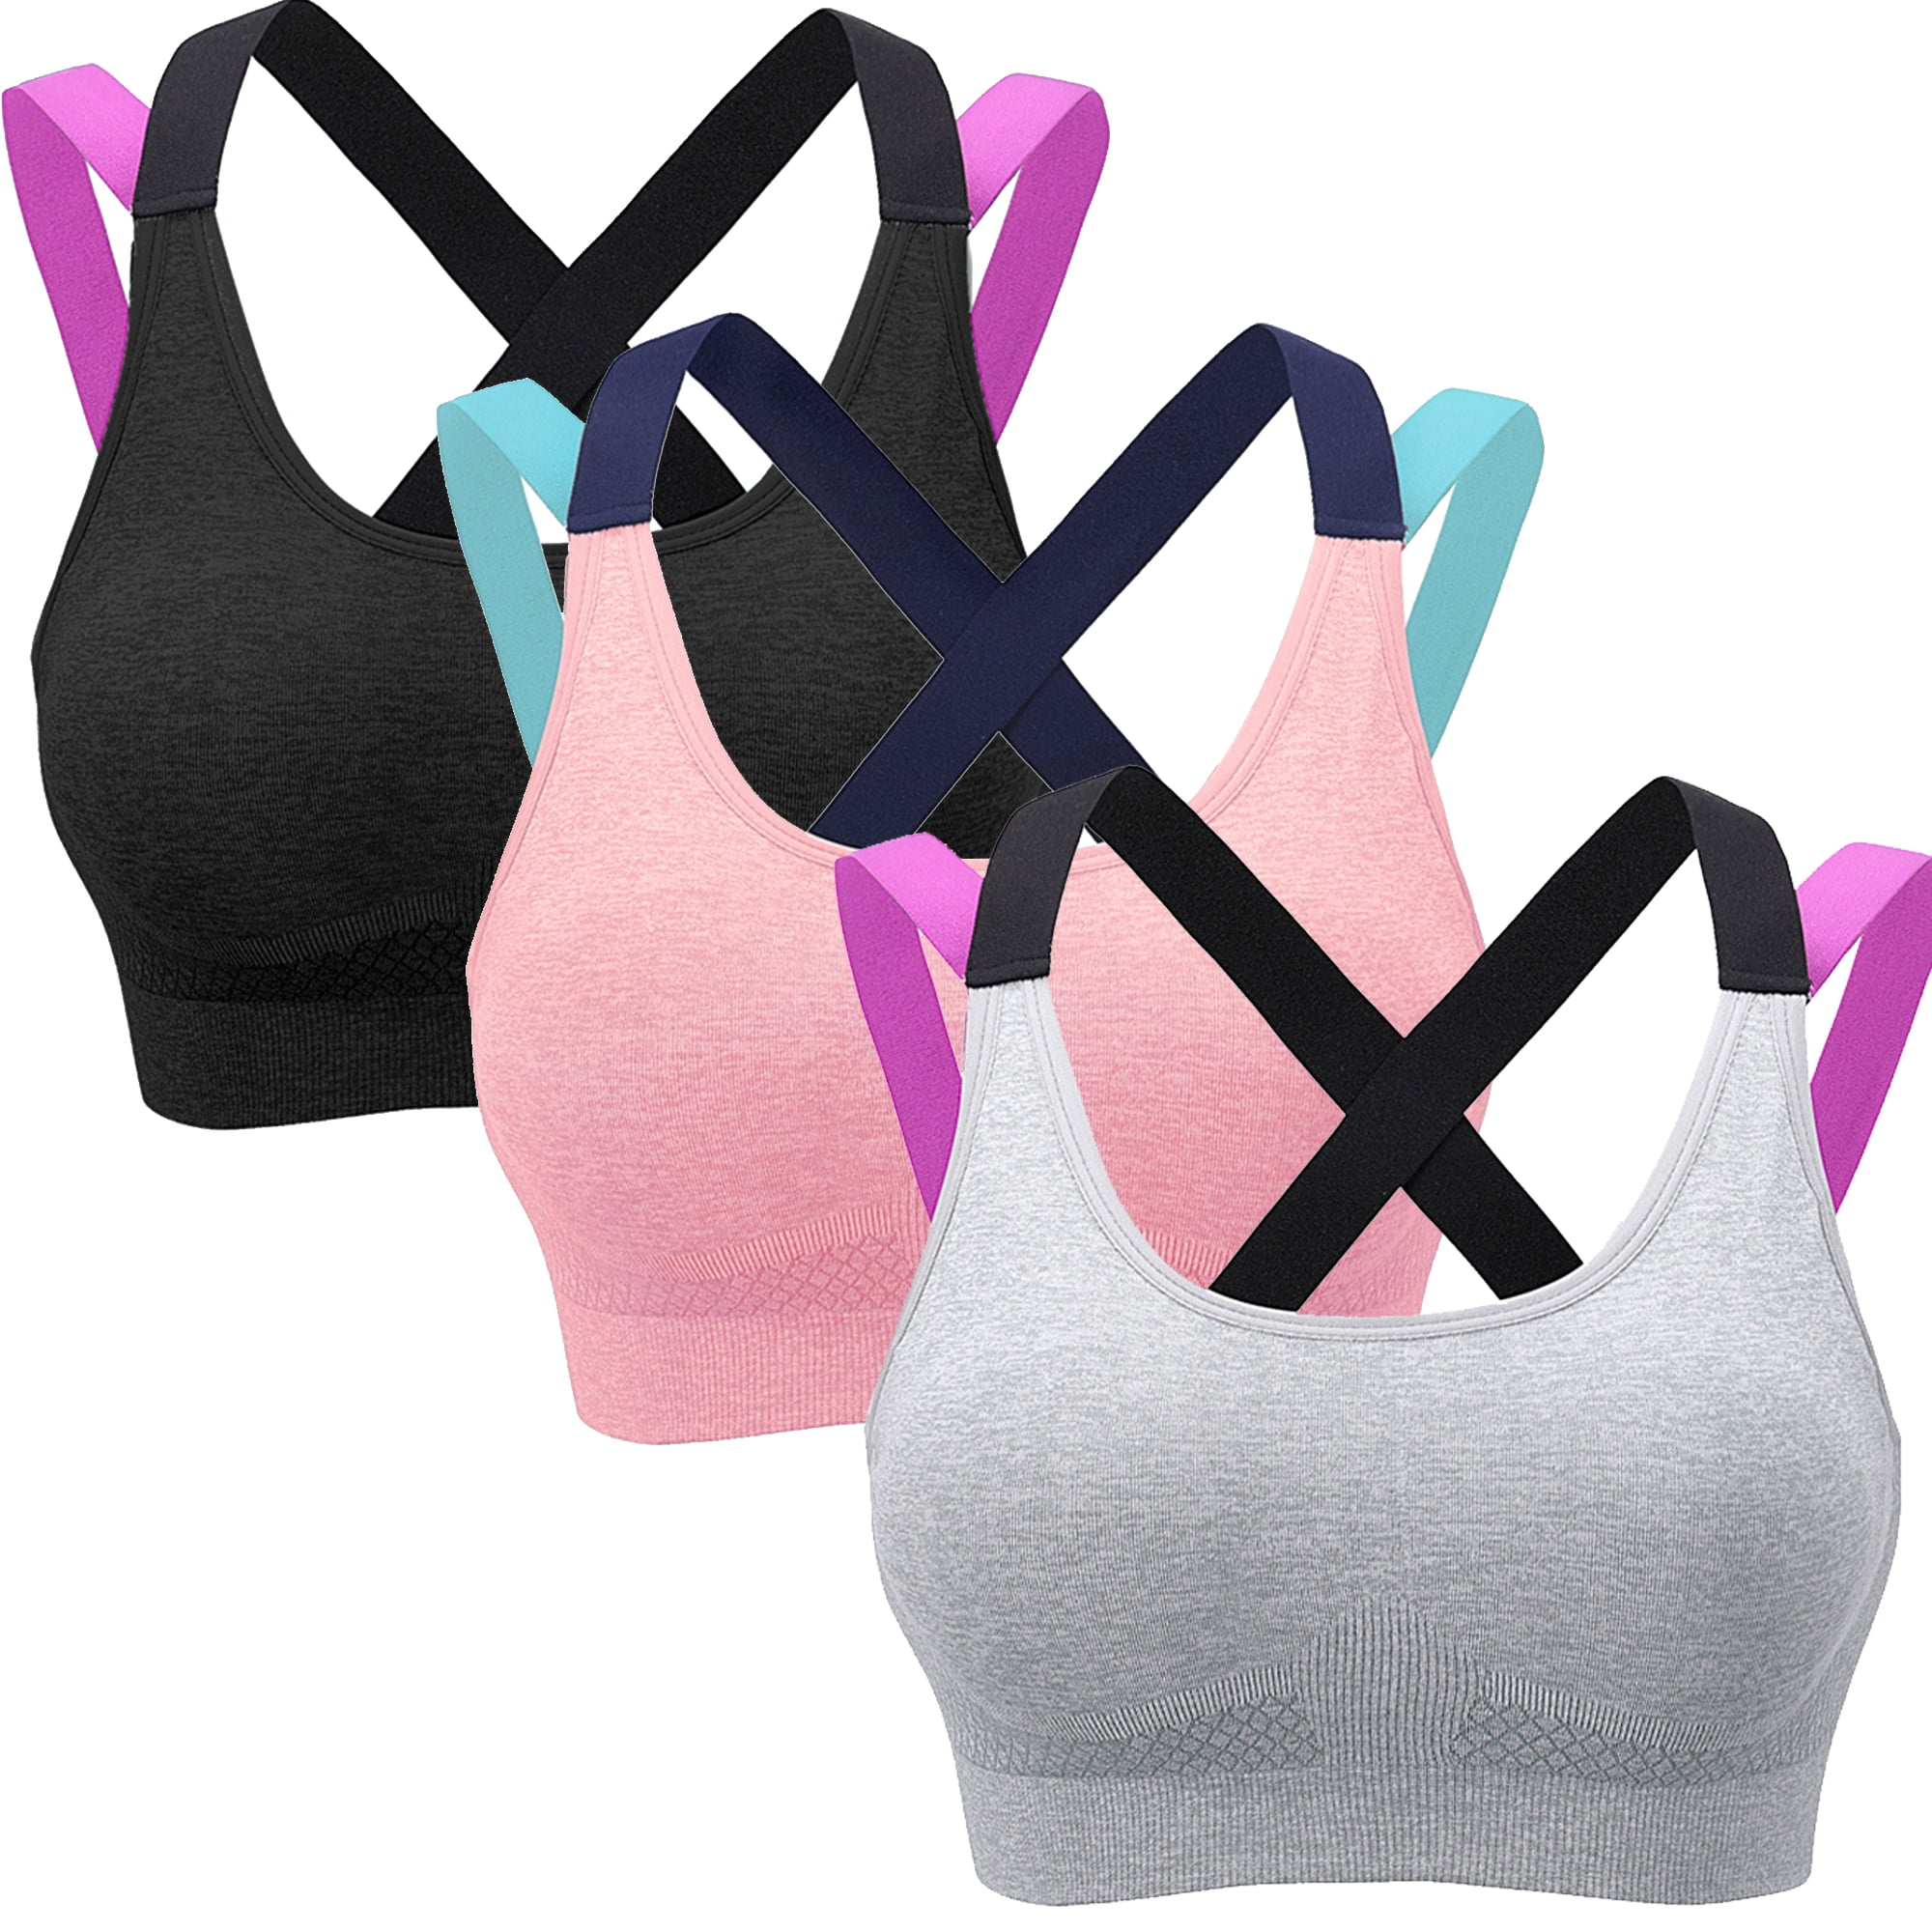 Elbourn 3 Pack Women's Medium Support Cross Back Wirefree